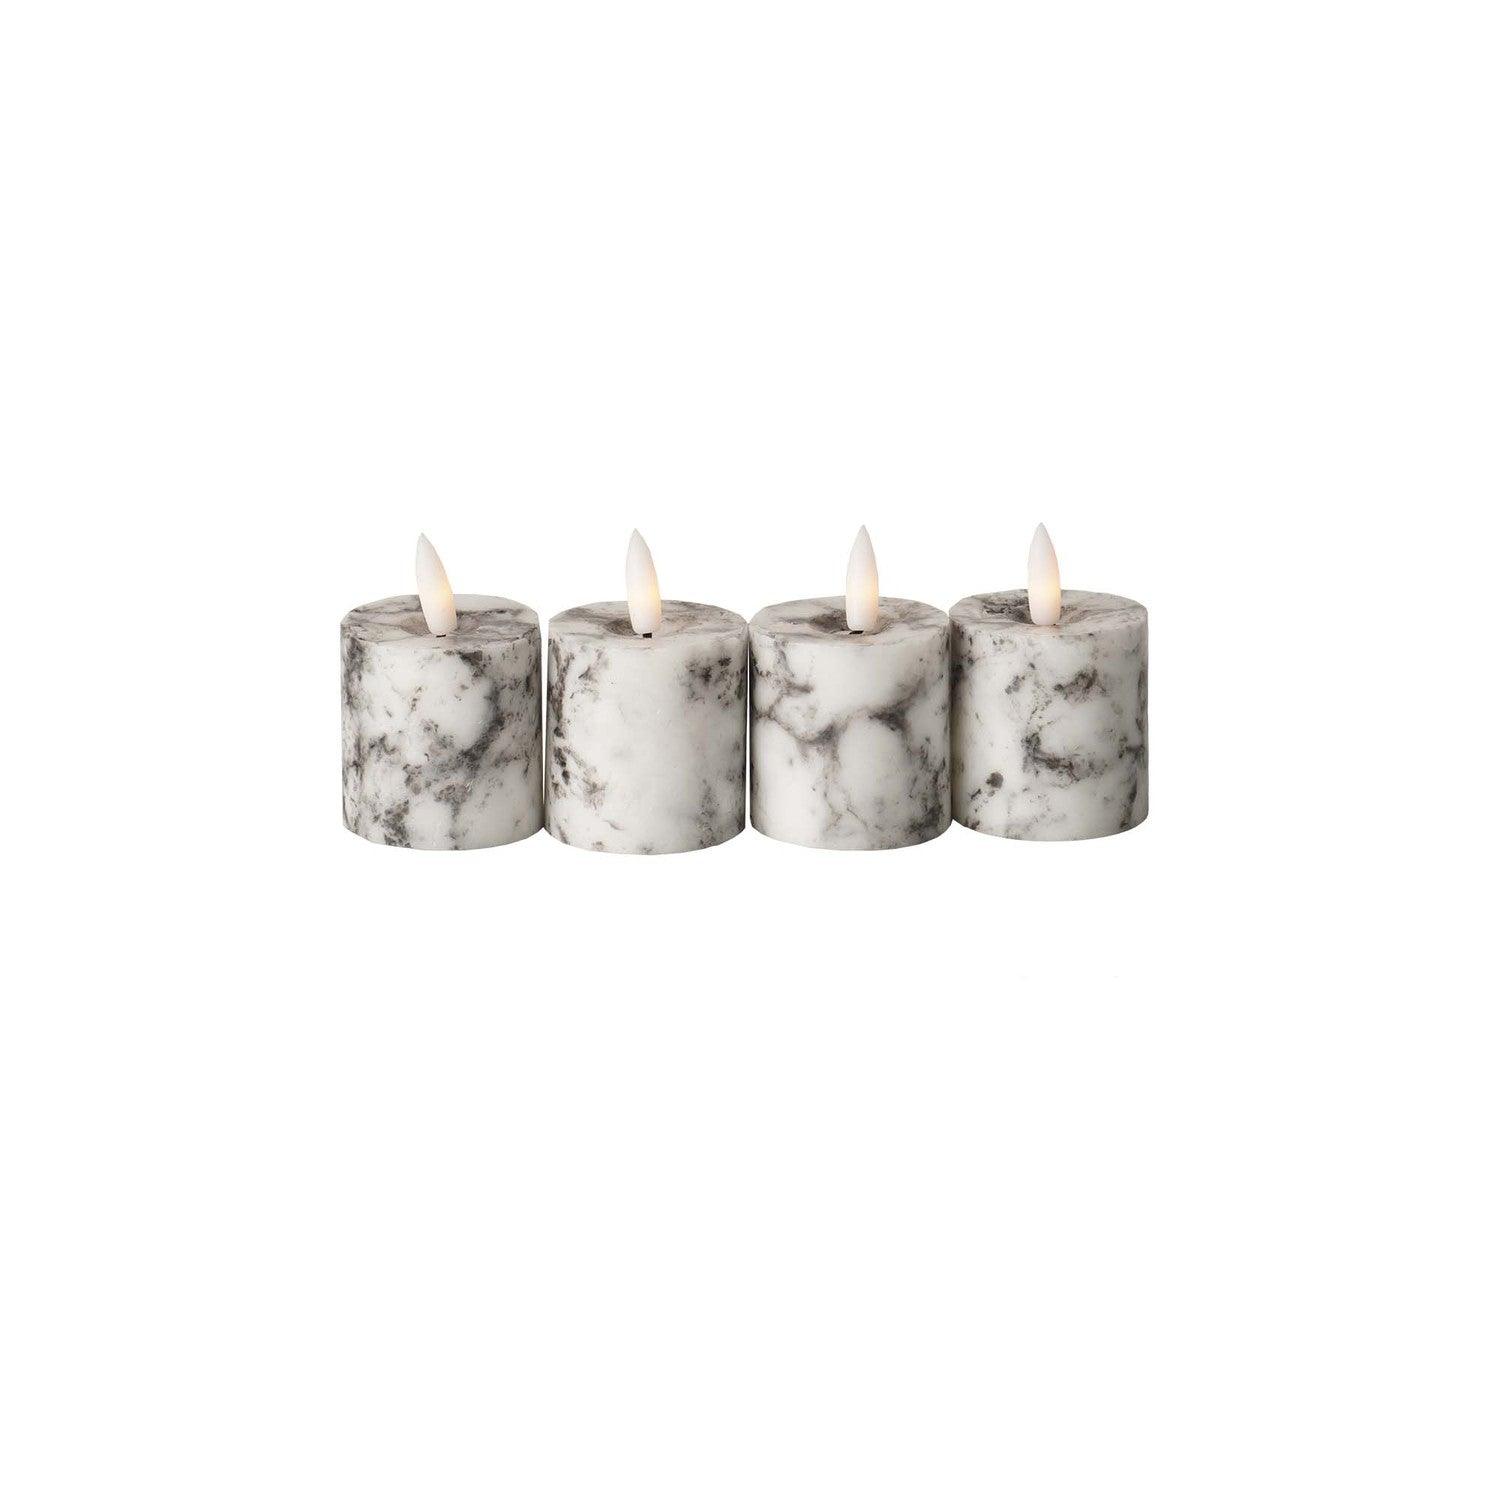 View Luxe Collection Natural Glow Marble Set of 4 LED Votives information